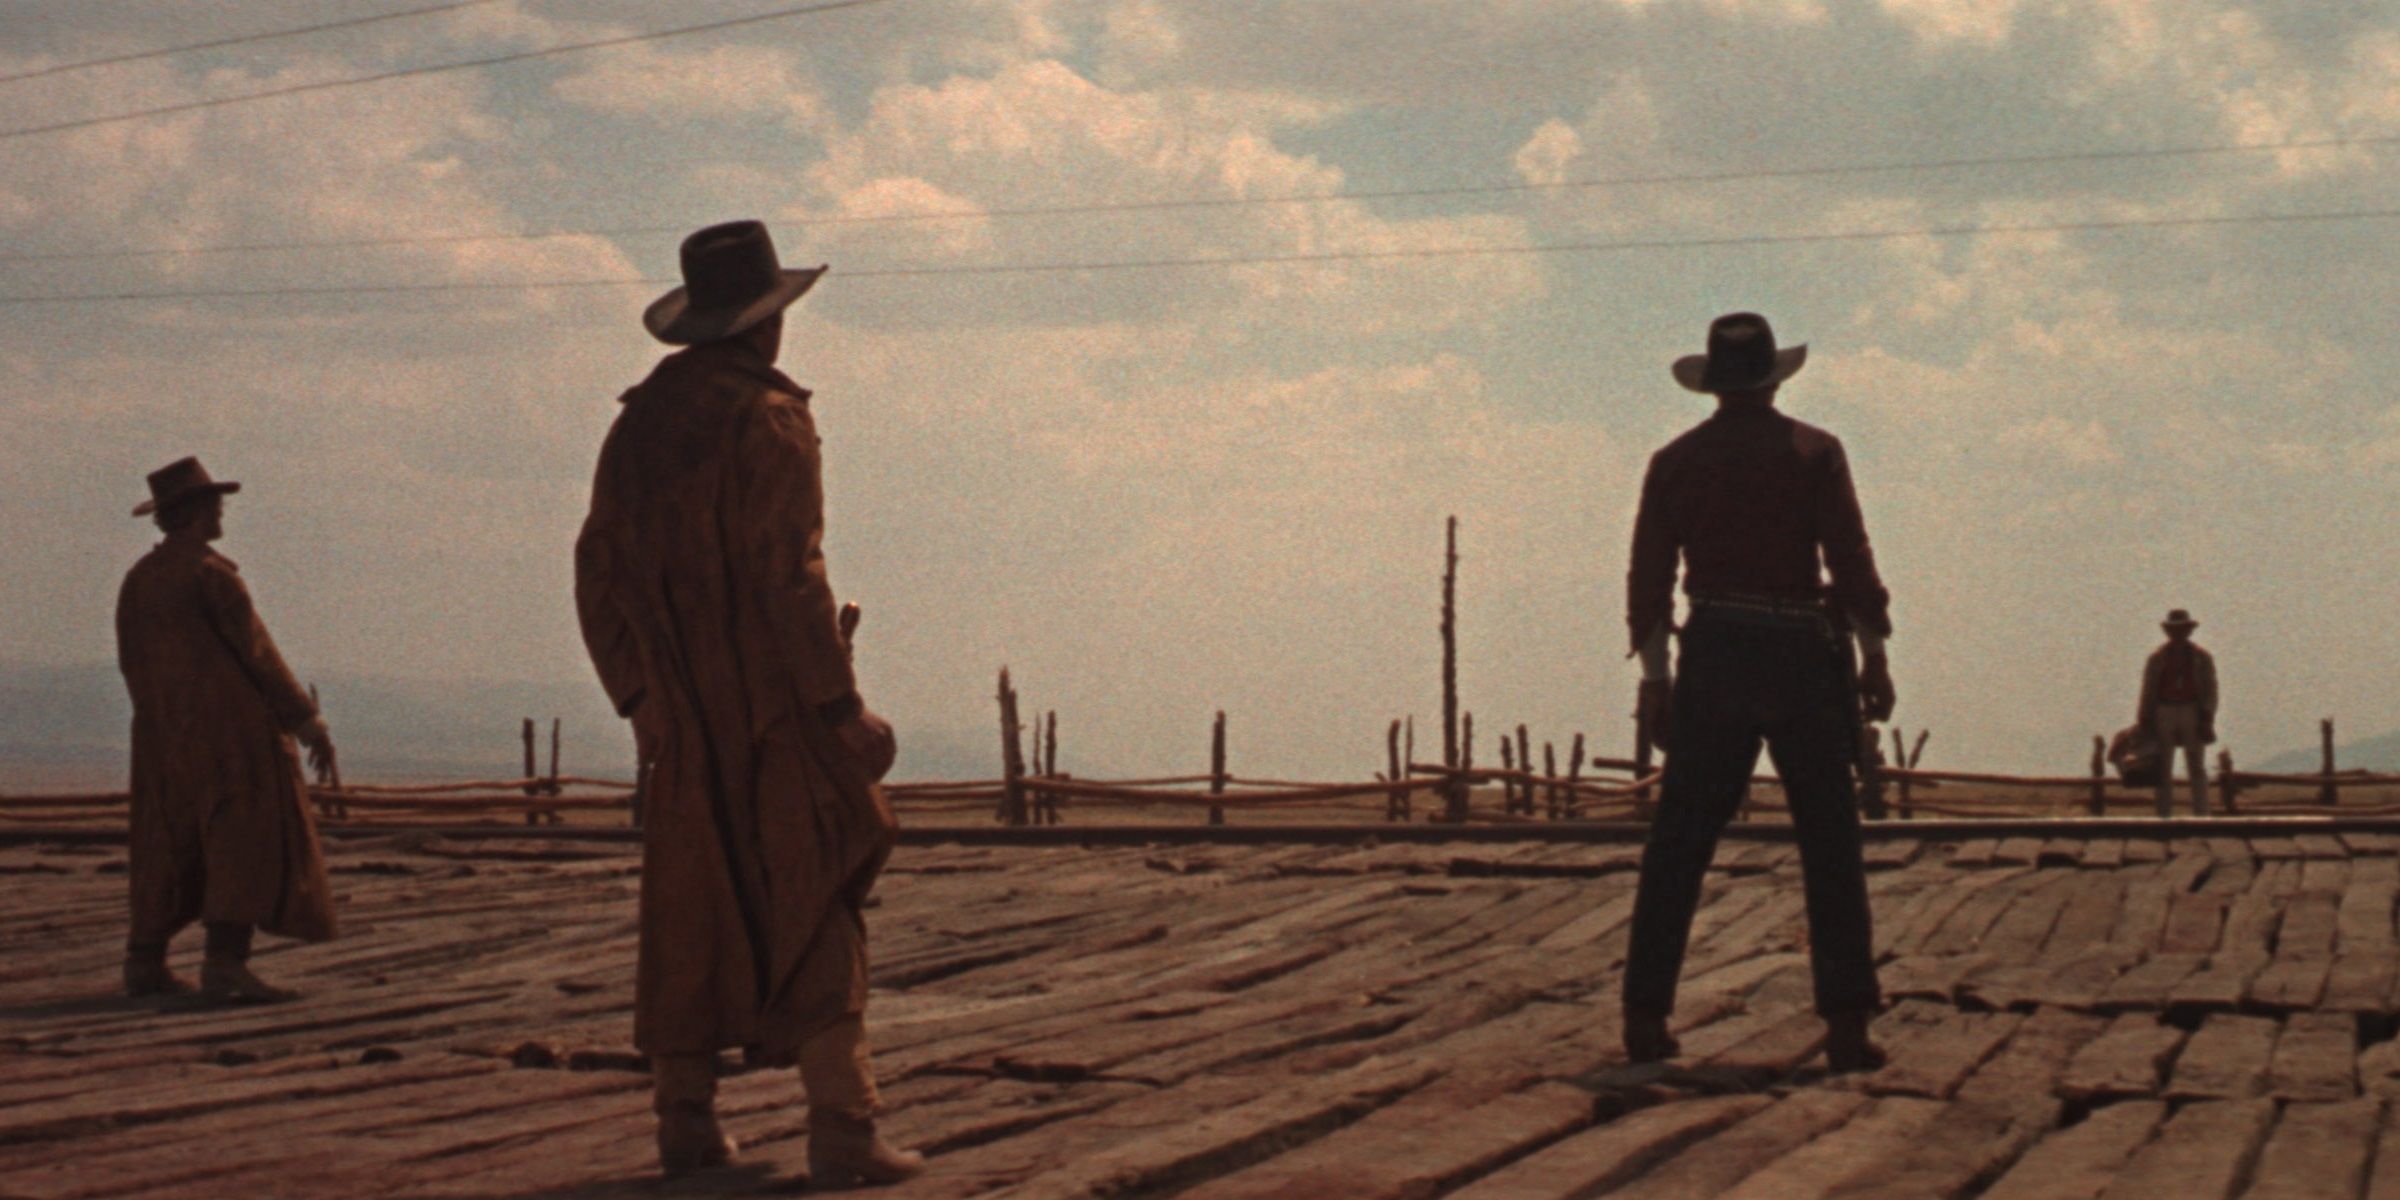 The opening scene of Once Upon a Time in the West